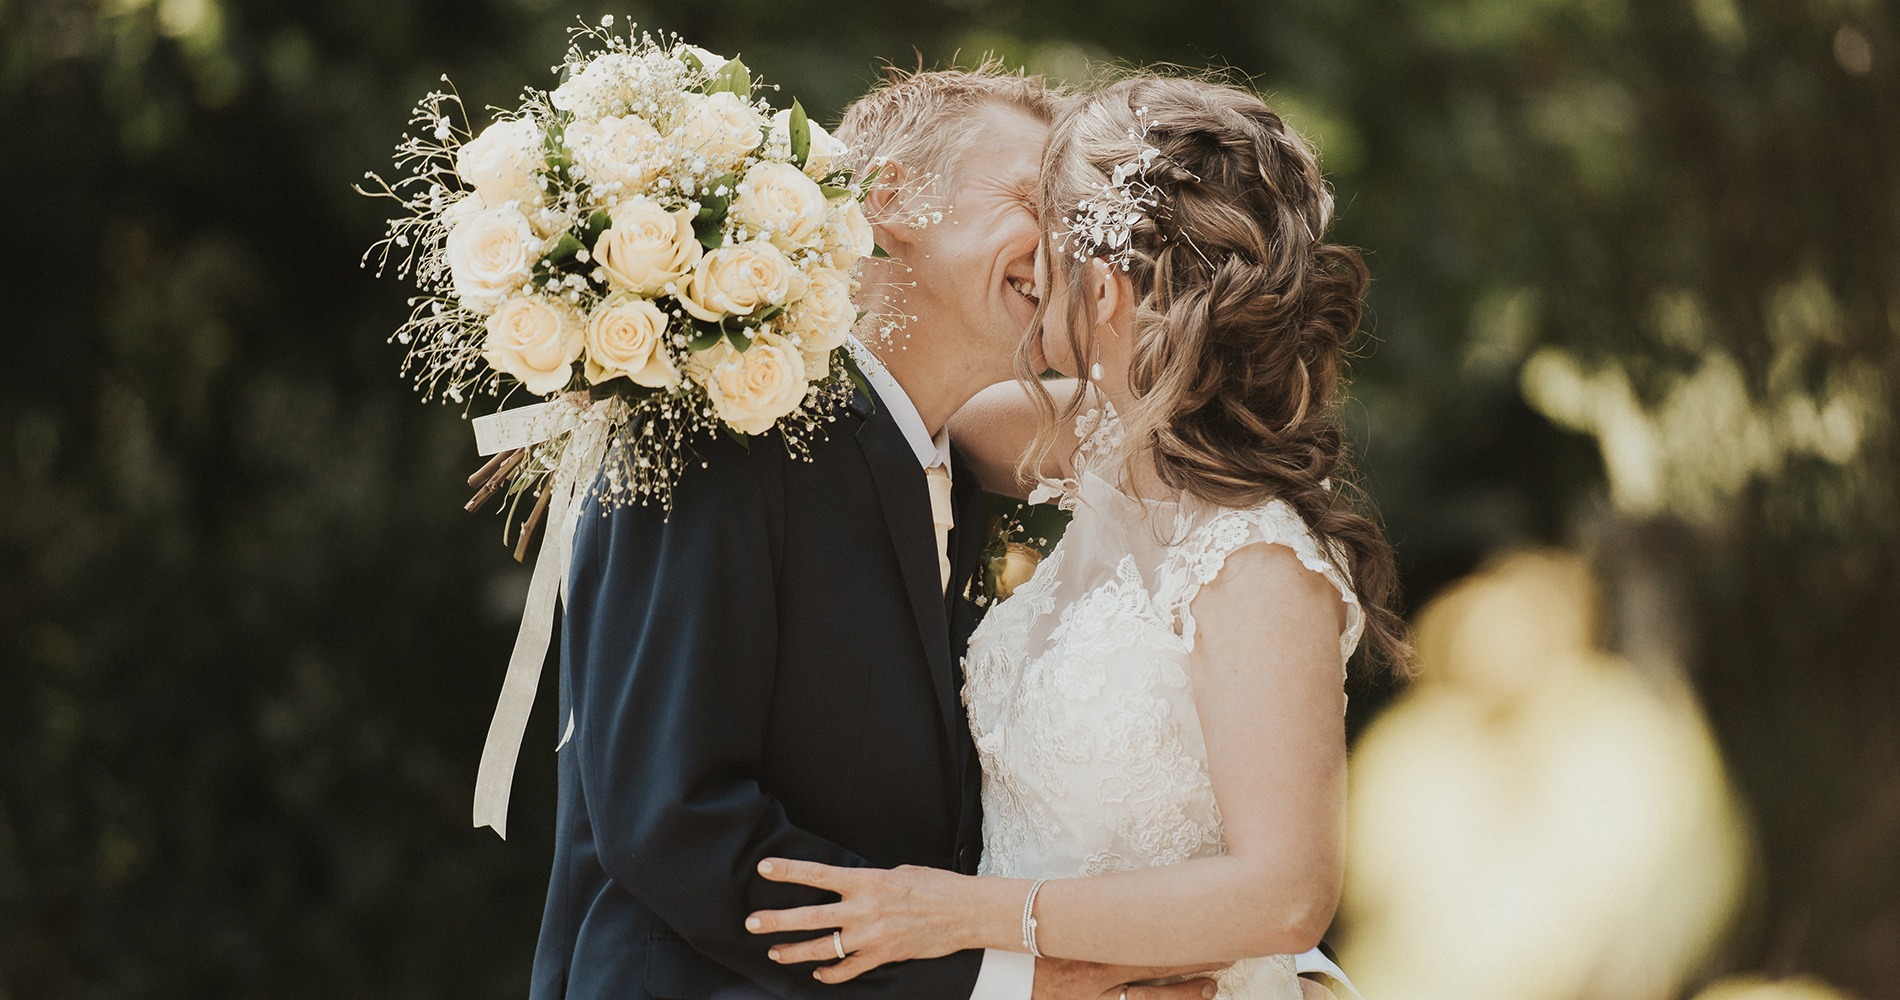 Bride and groom kiss - Wedding Photography by Tracey Allsopp